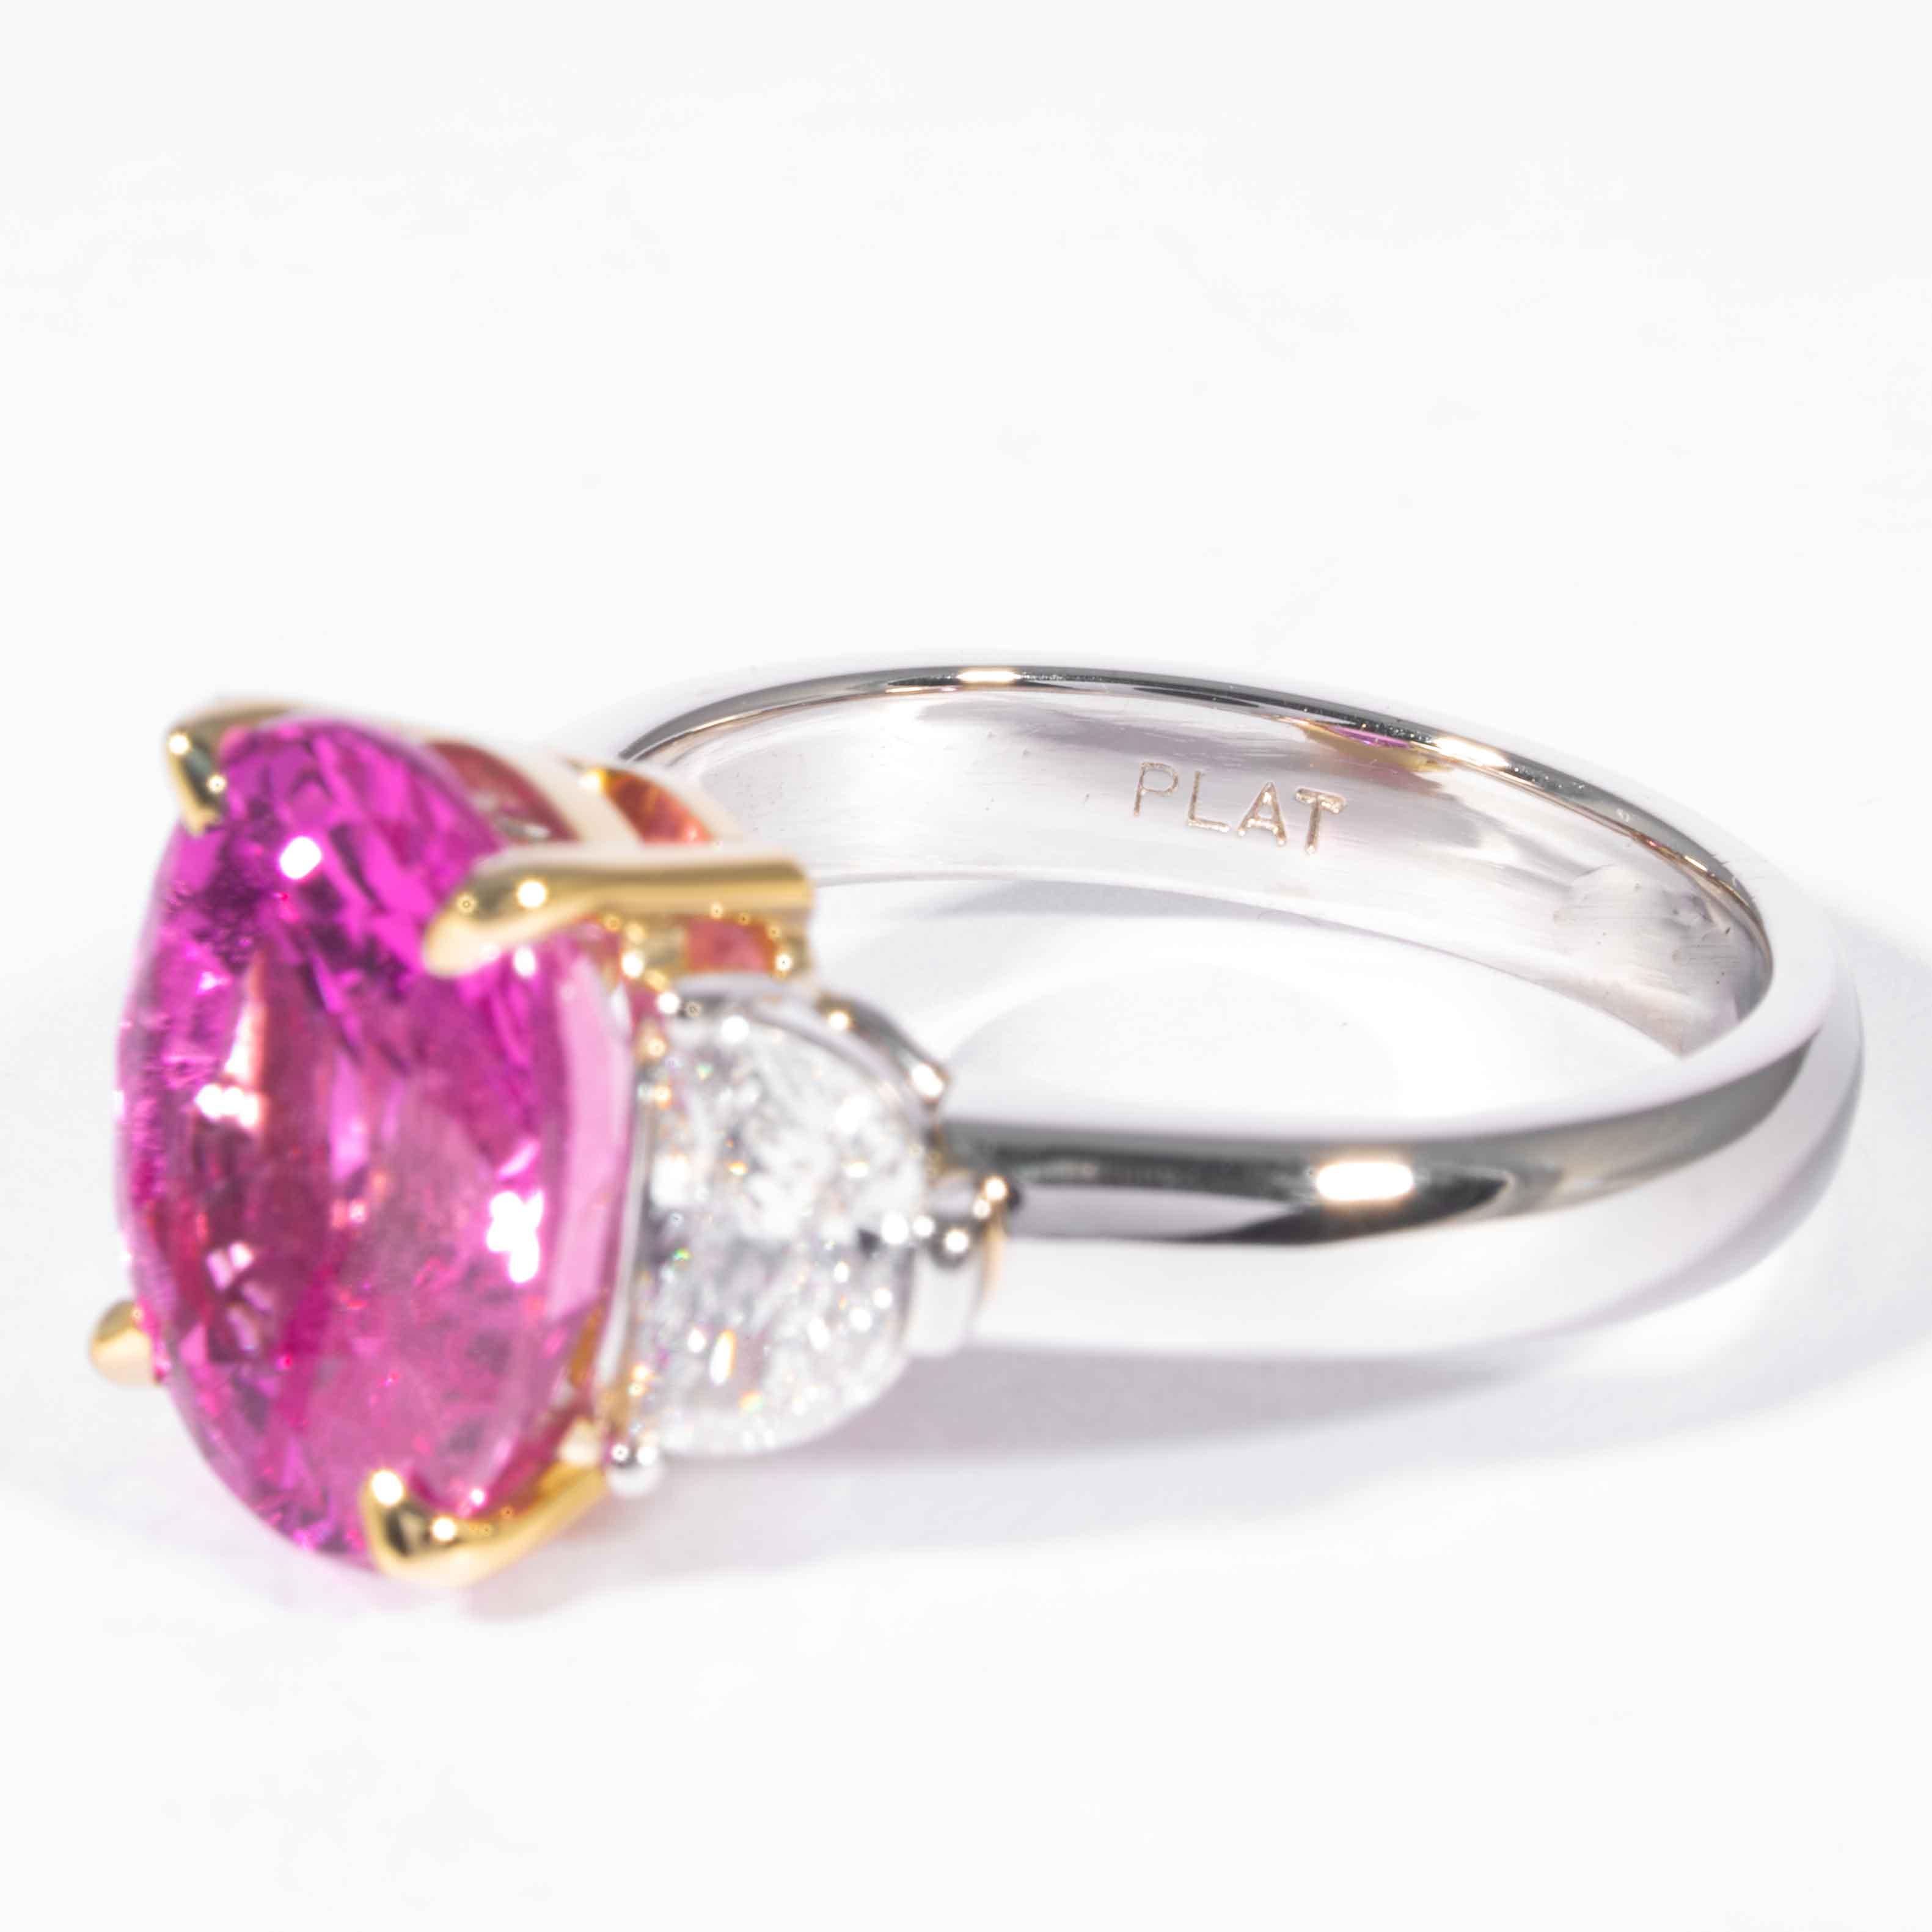 Women's Shreve, Crump & Low 6.22 Carat Oval Cut Pink Sapphire and Diamond 3-Stone Ring For Sale